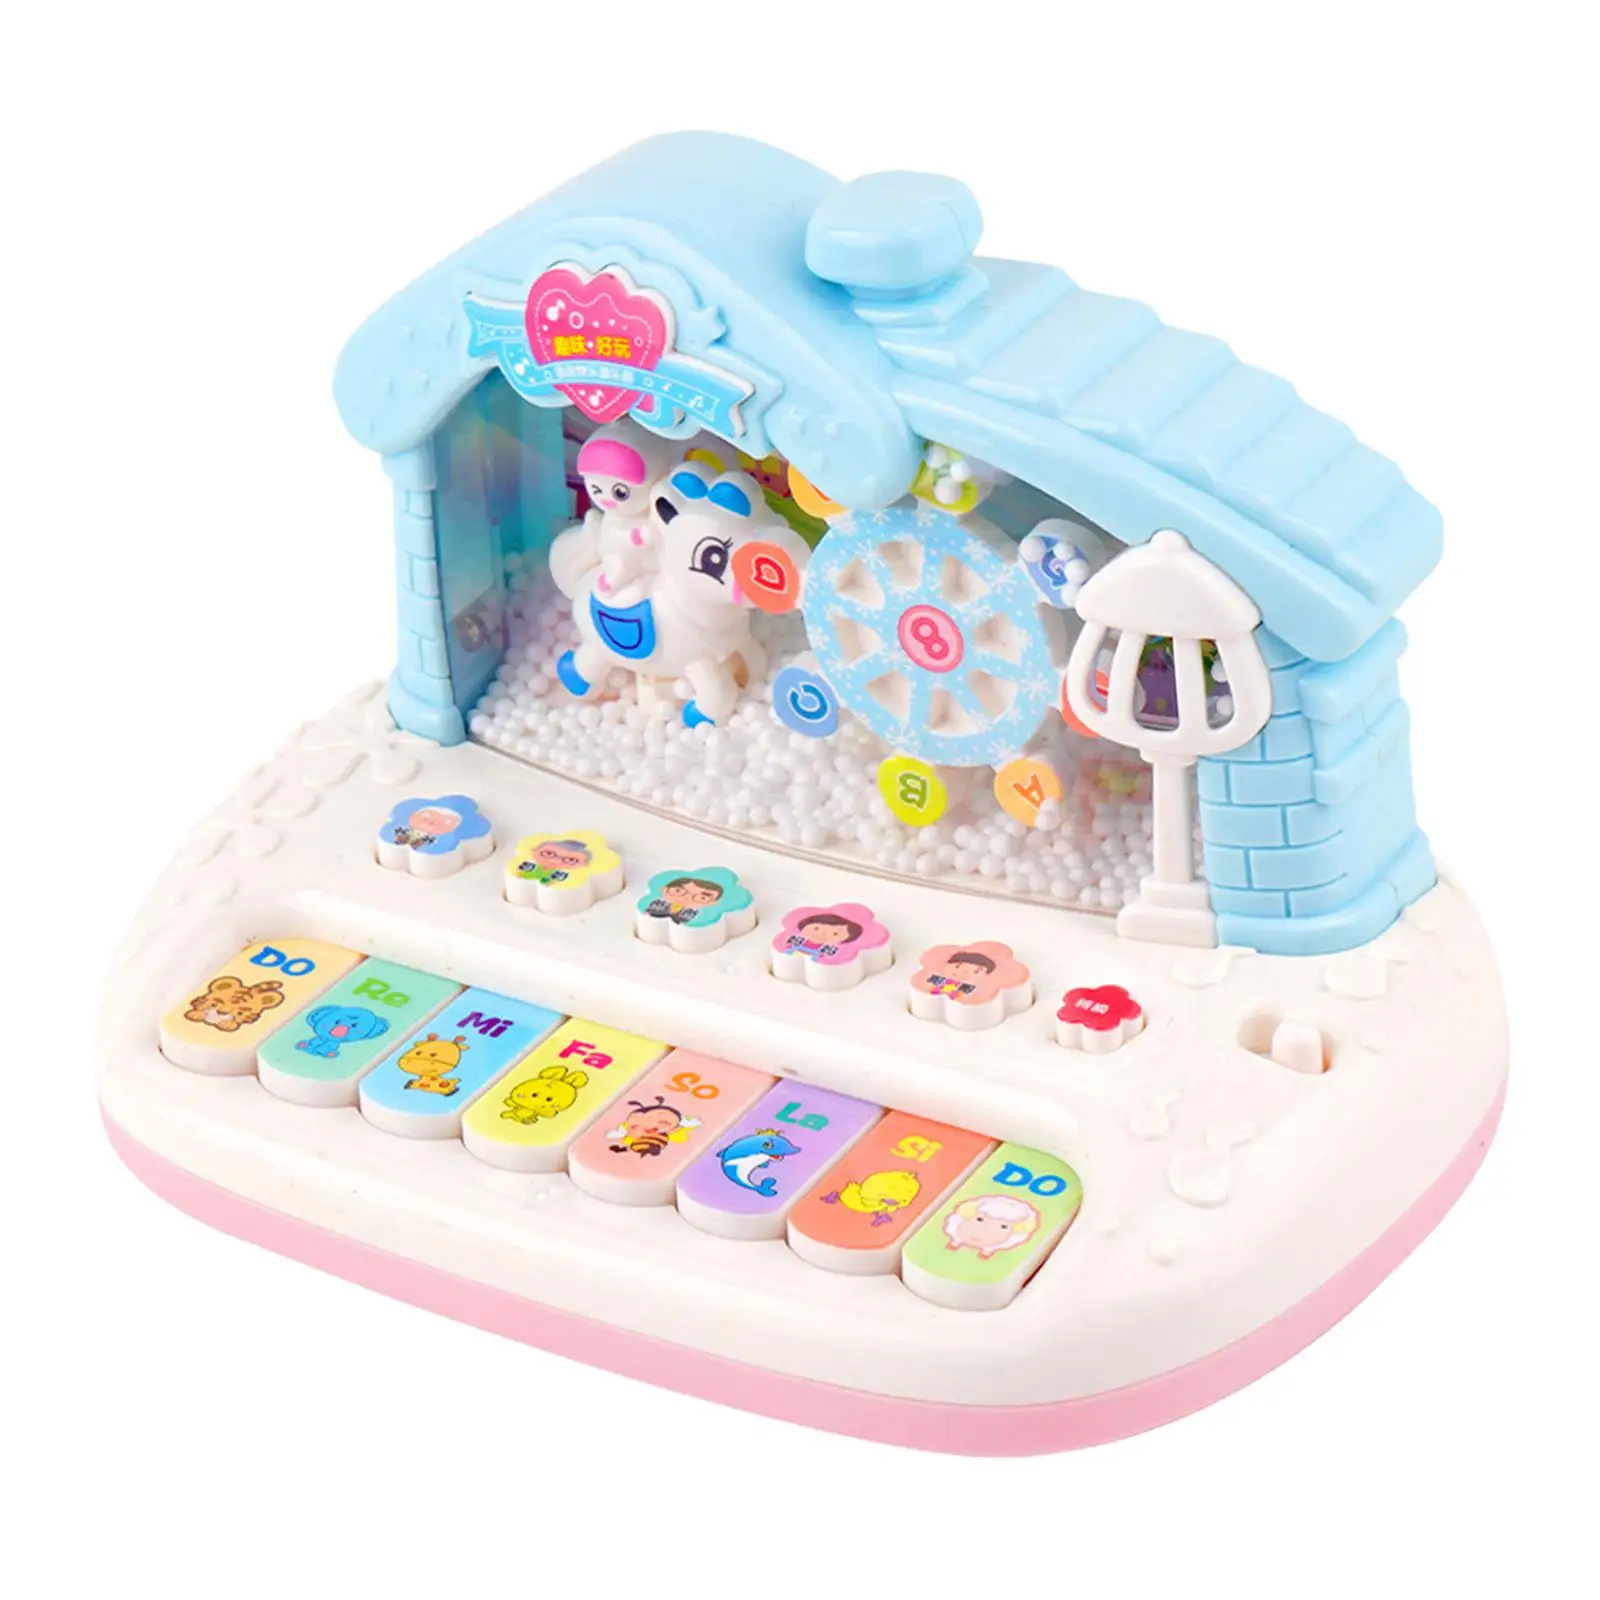 Simulation Musical Instrument Hand Eye Coordination Early Educational Toys Electronic Piano Toy for Boys Girls Birthday Gifts